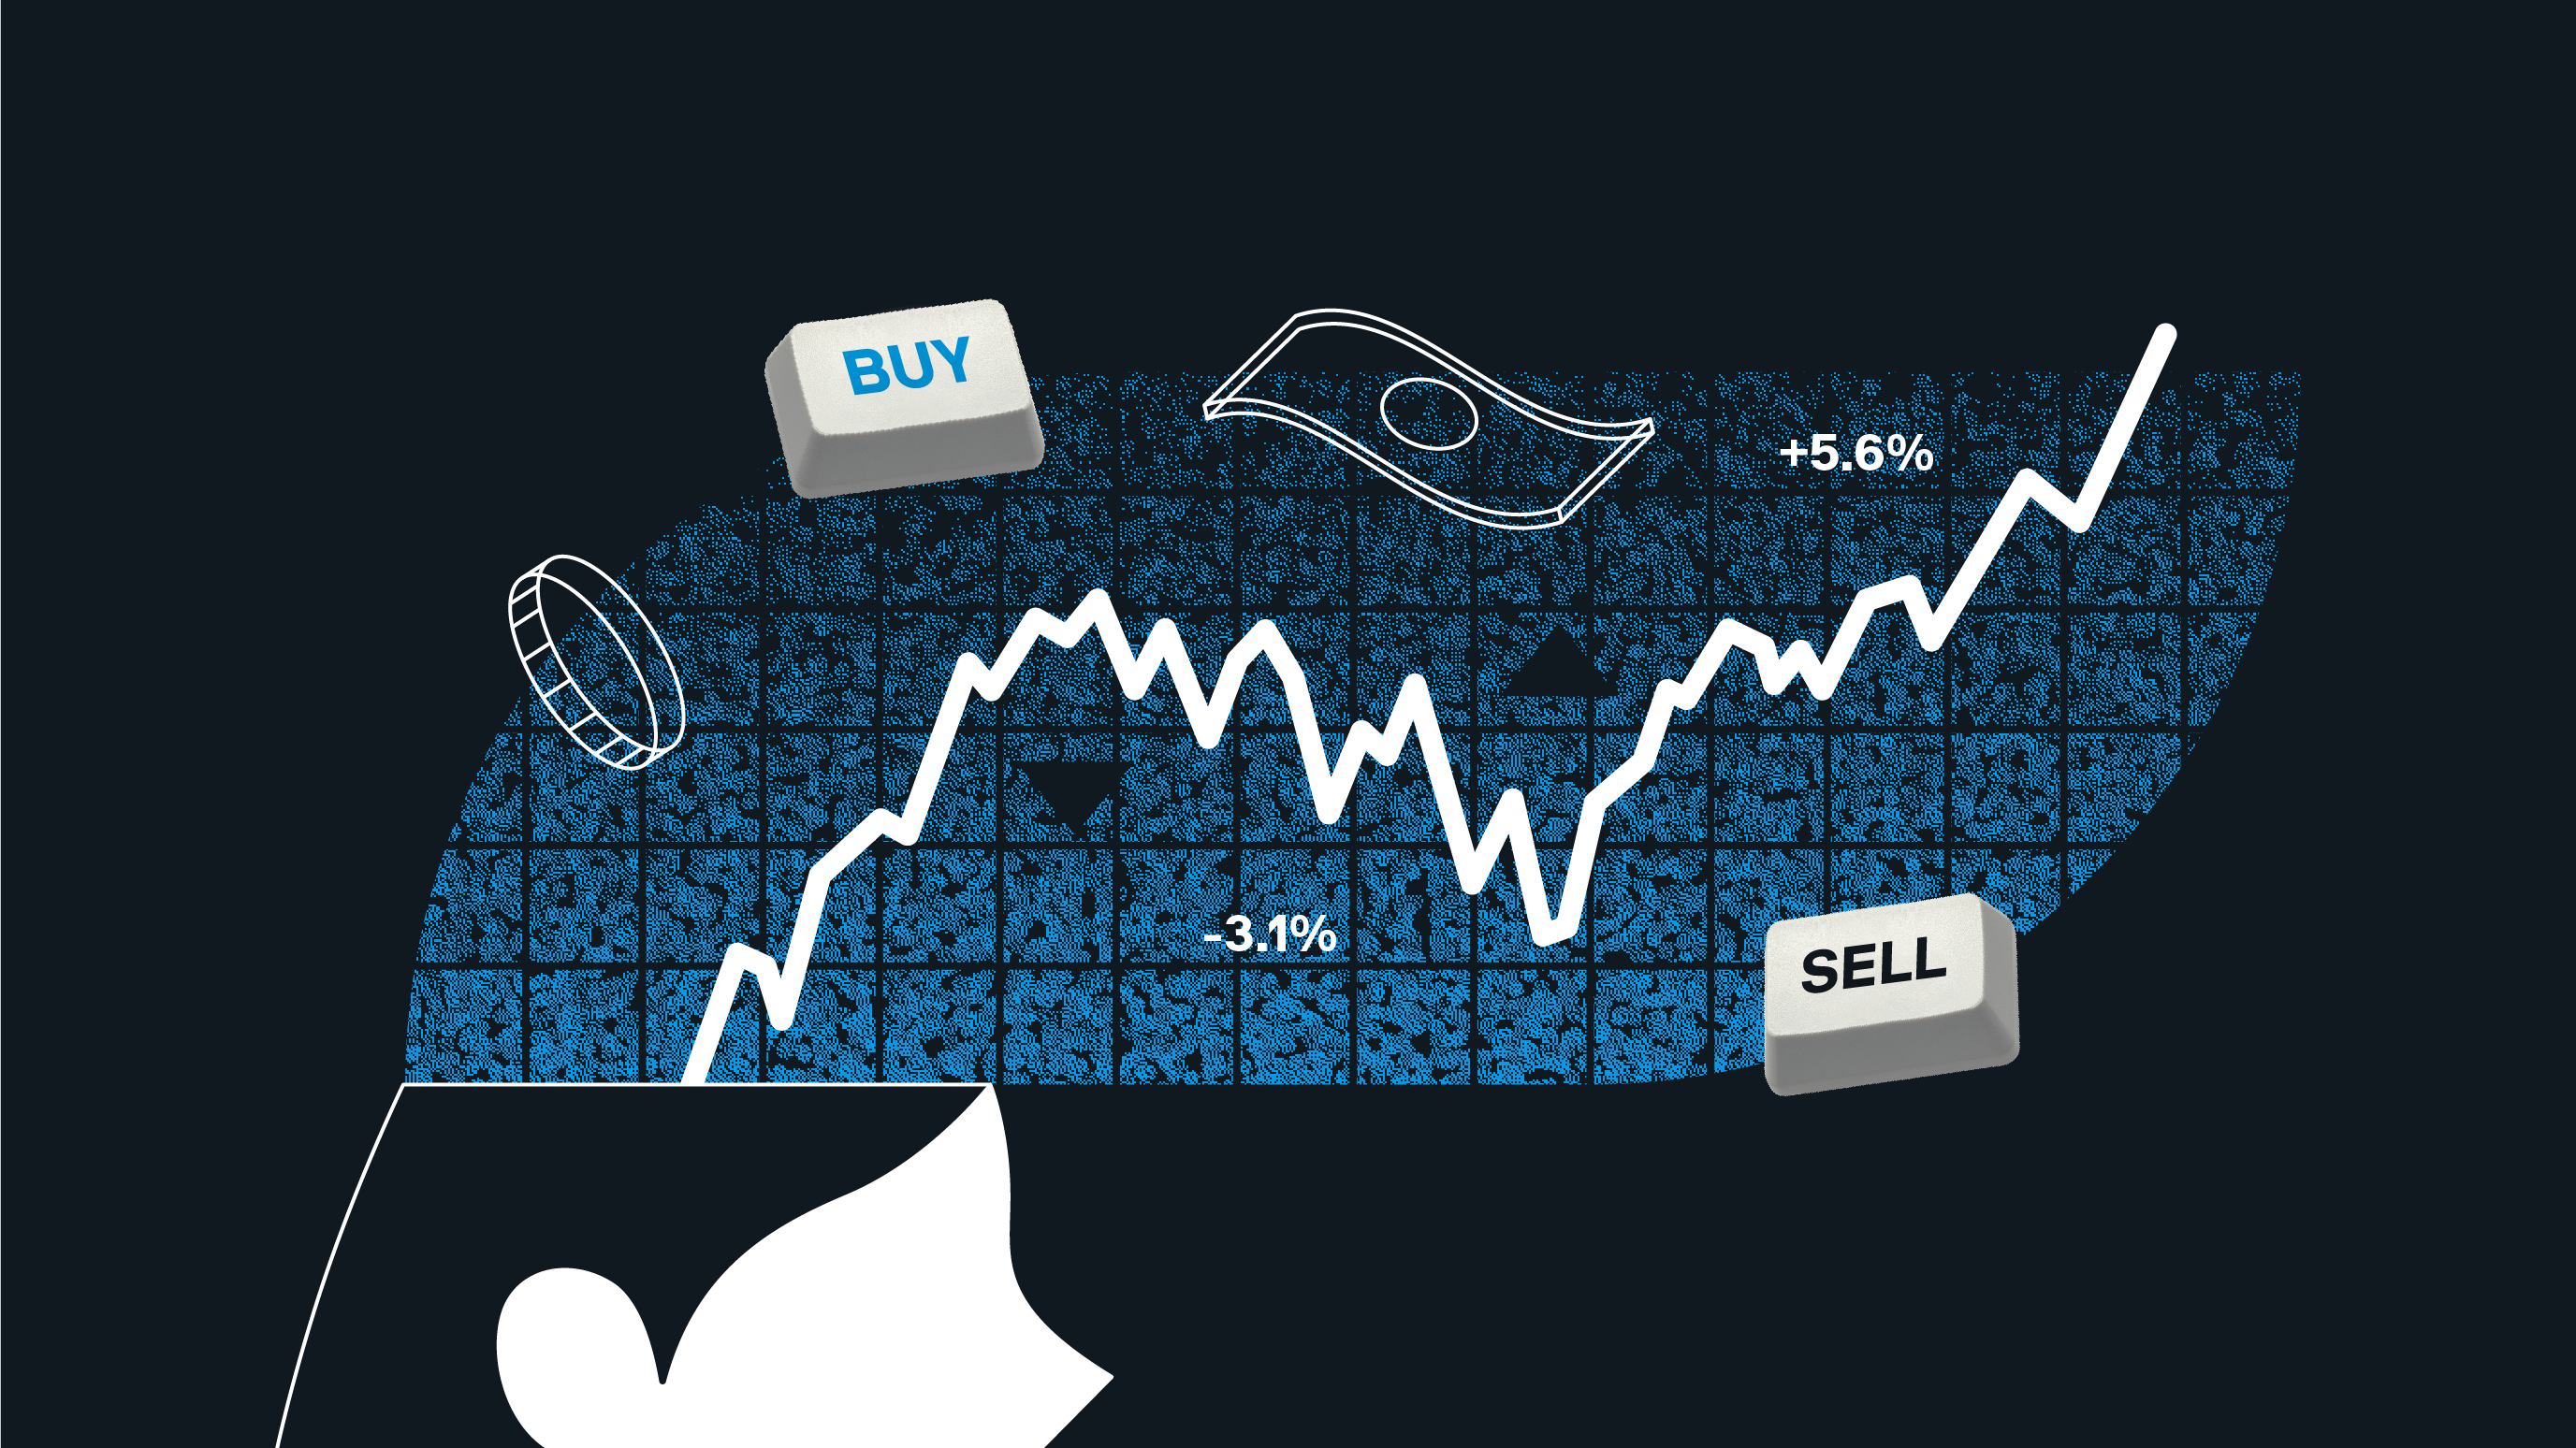 An illustrated head is pouring out icons alluding to stock markets and stock market statistics, including terms like “buy” and “sell,” as well as a credit card and coin.